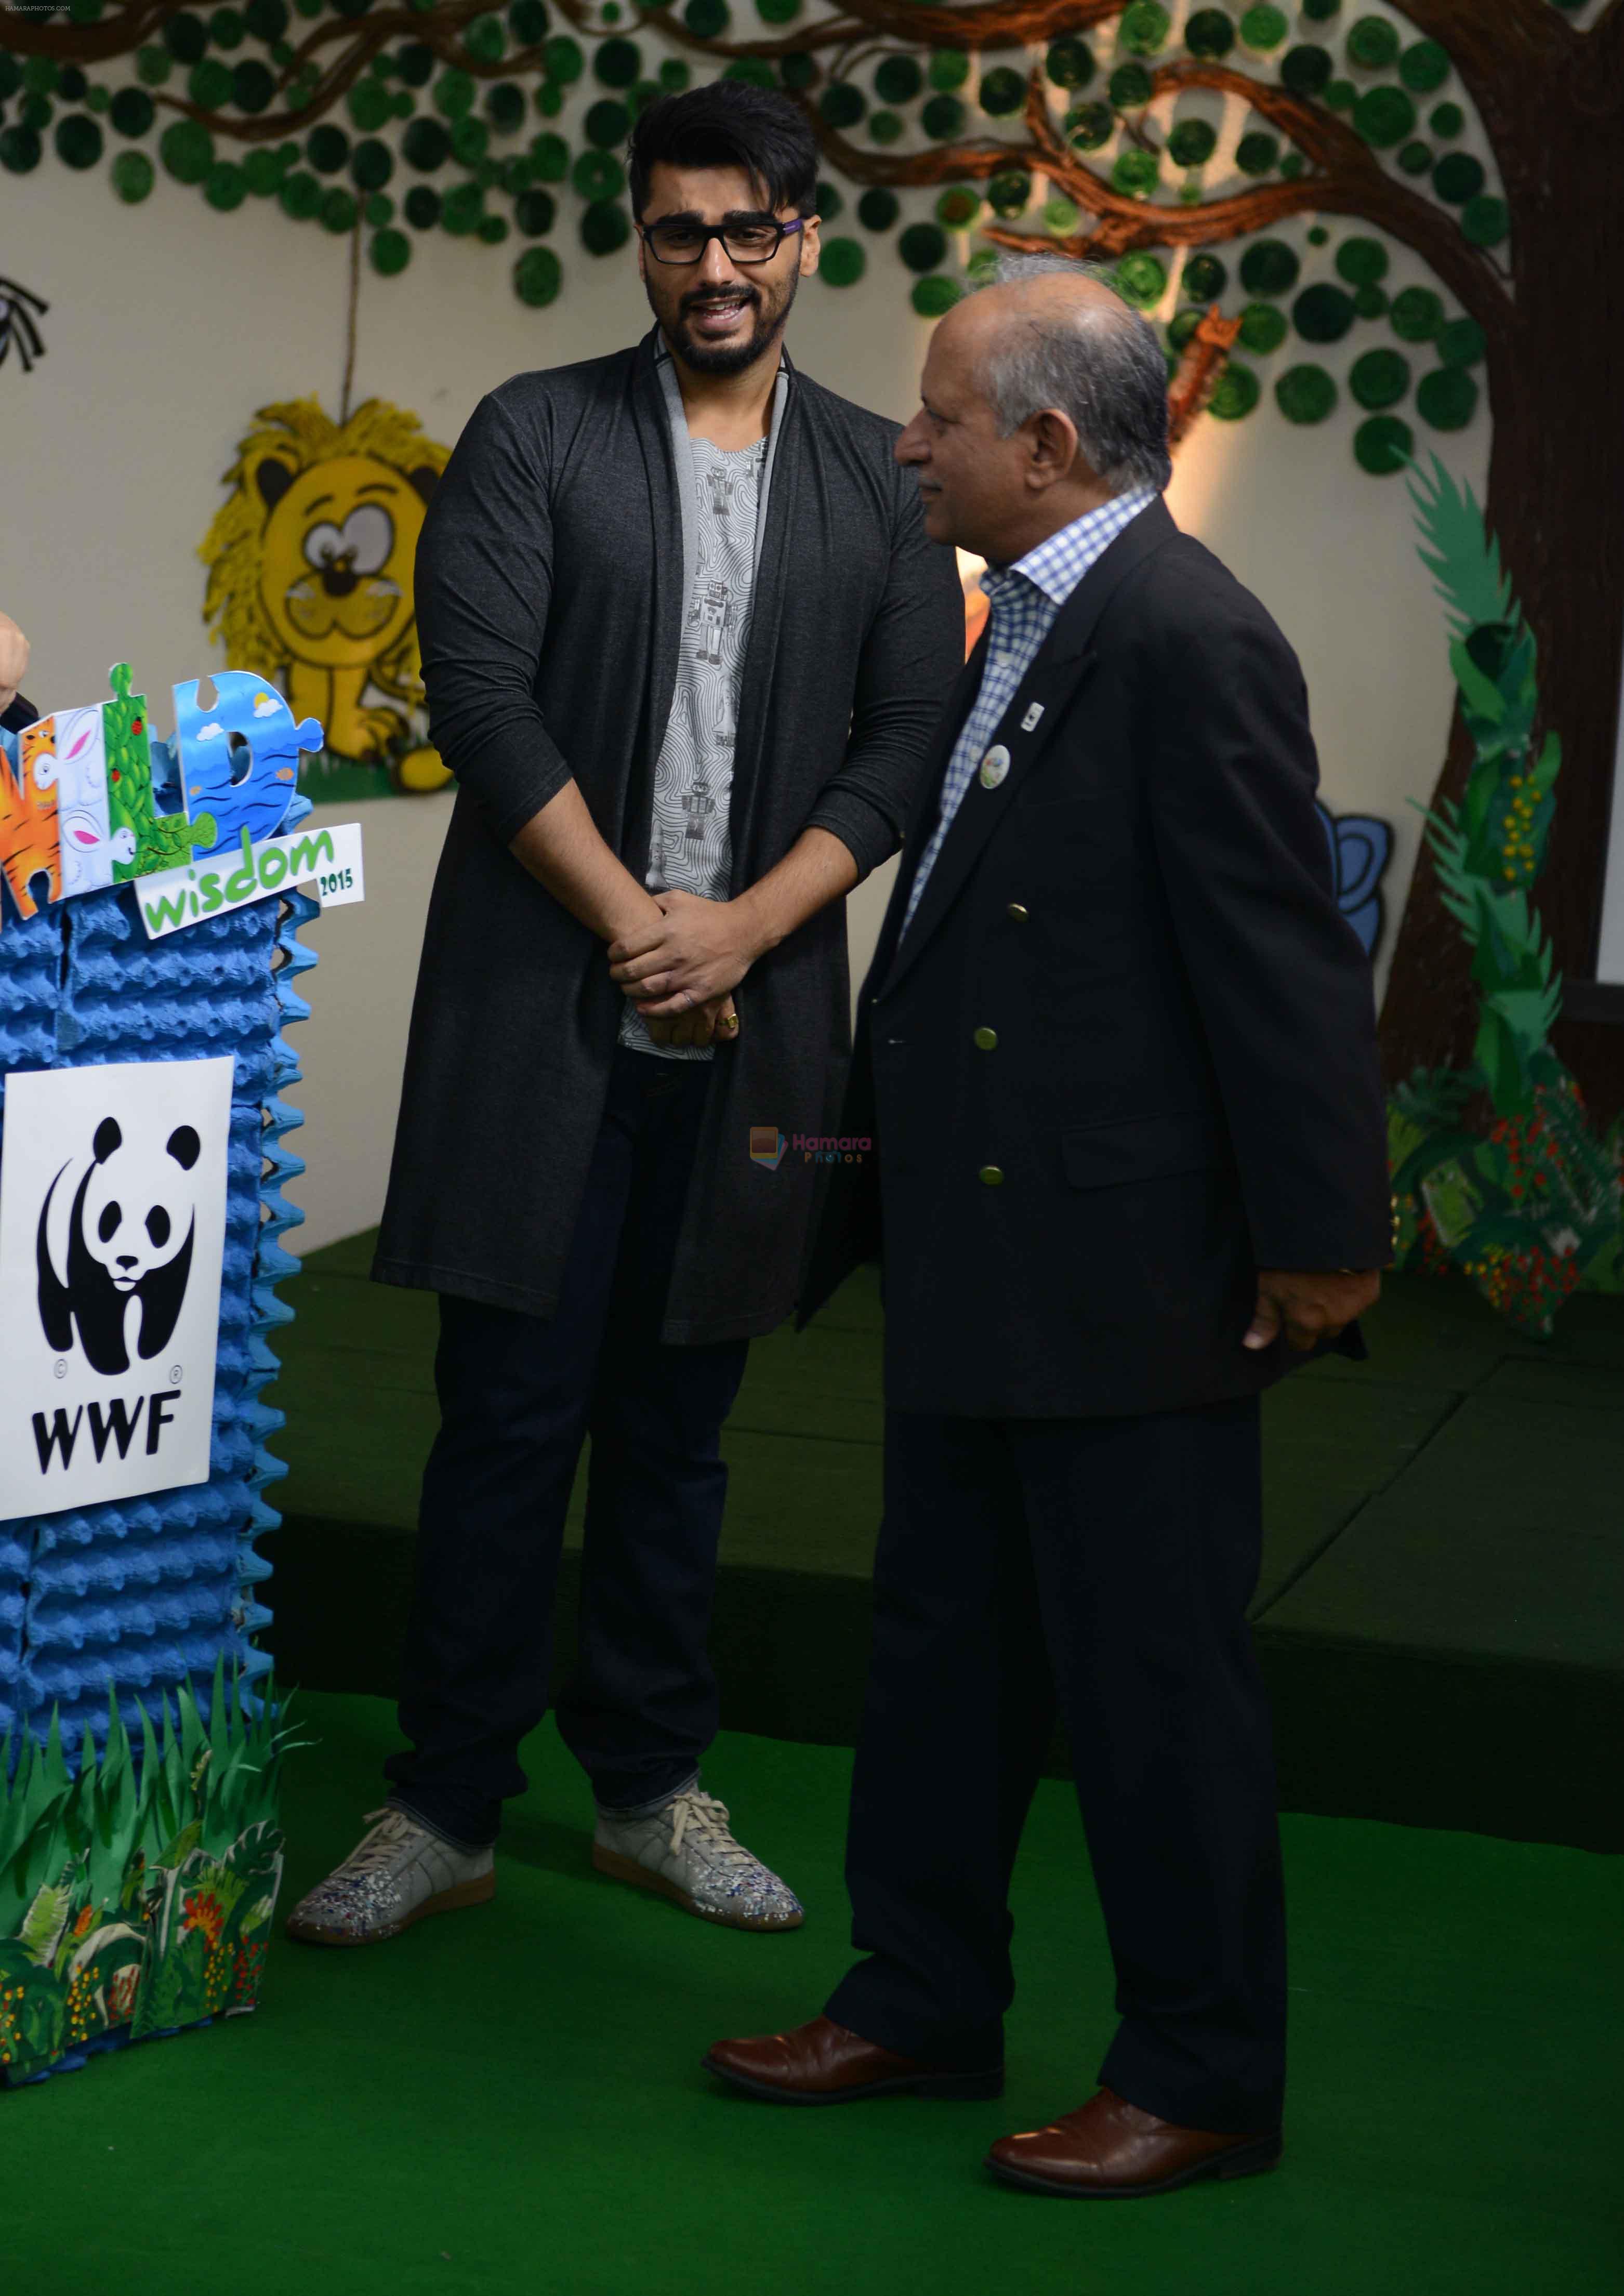 Arjun Kapoor during the National final of the 8th Edition of ashia's largest & National Level Wildlife Quiz The Wild Wisdom Quiz-2015 at WWF India Auditorium Lodi estate in new Delhi on 7th Oct 2015